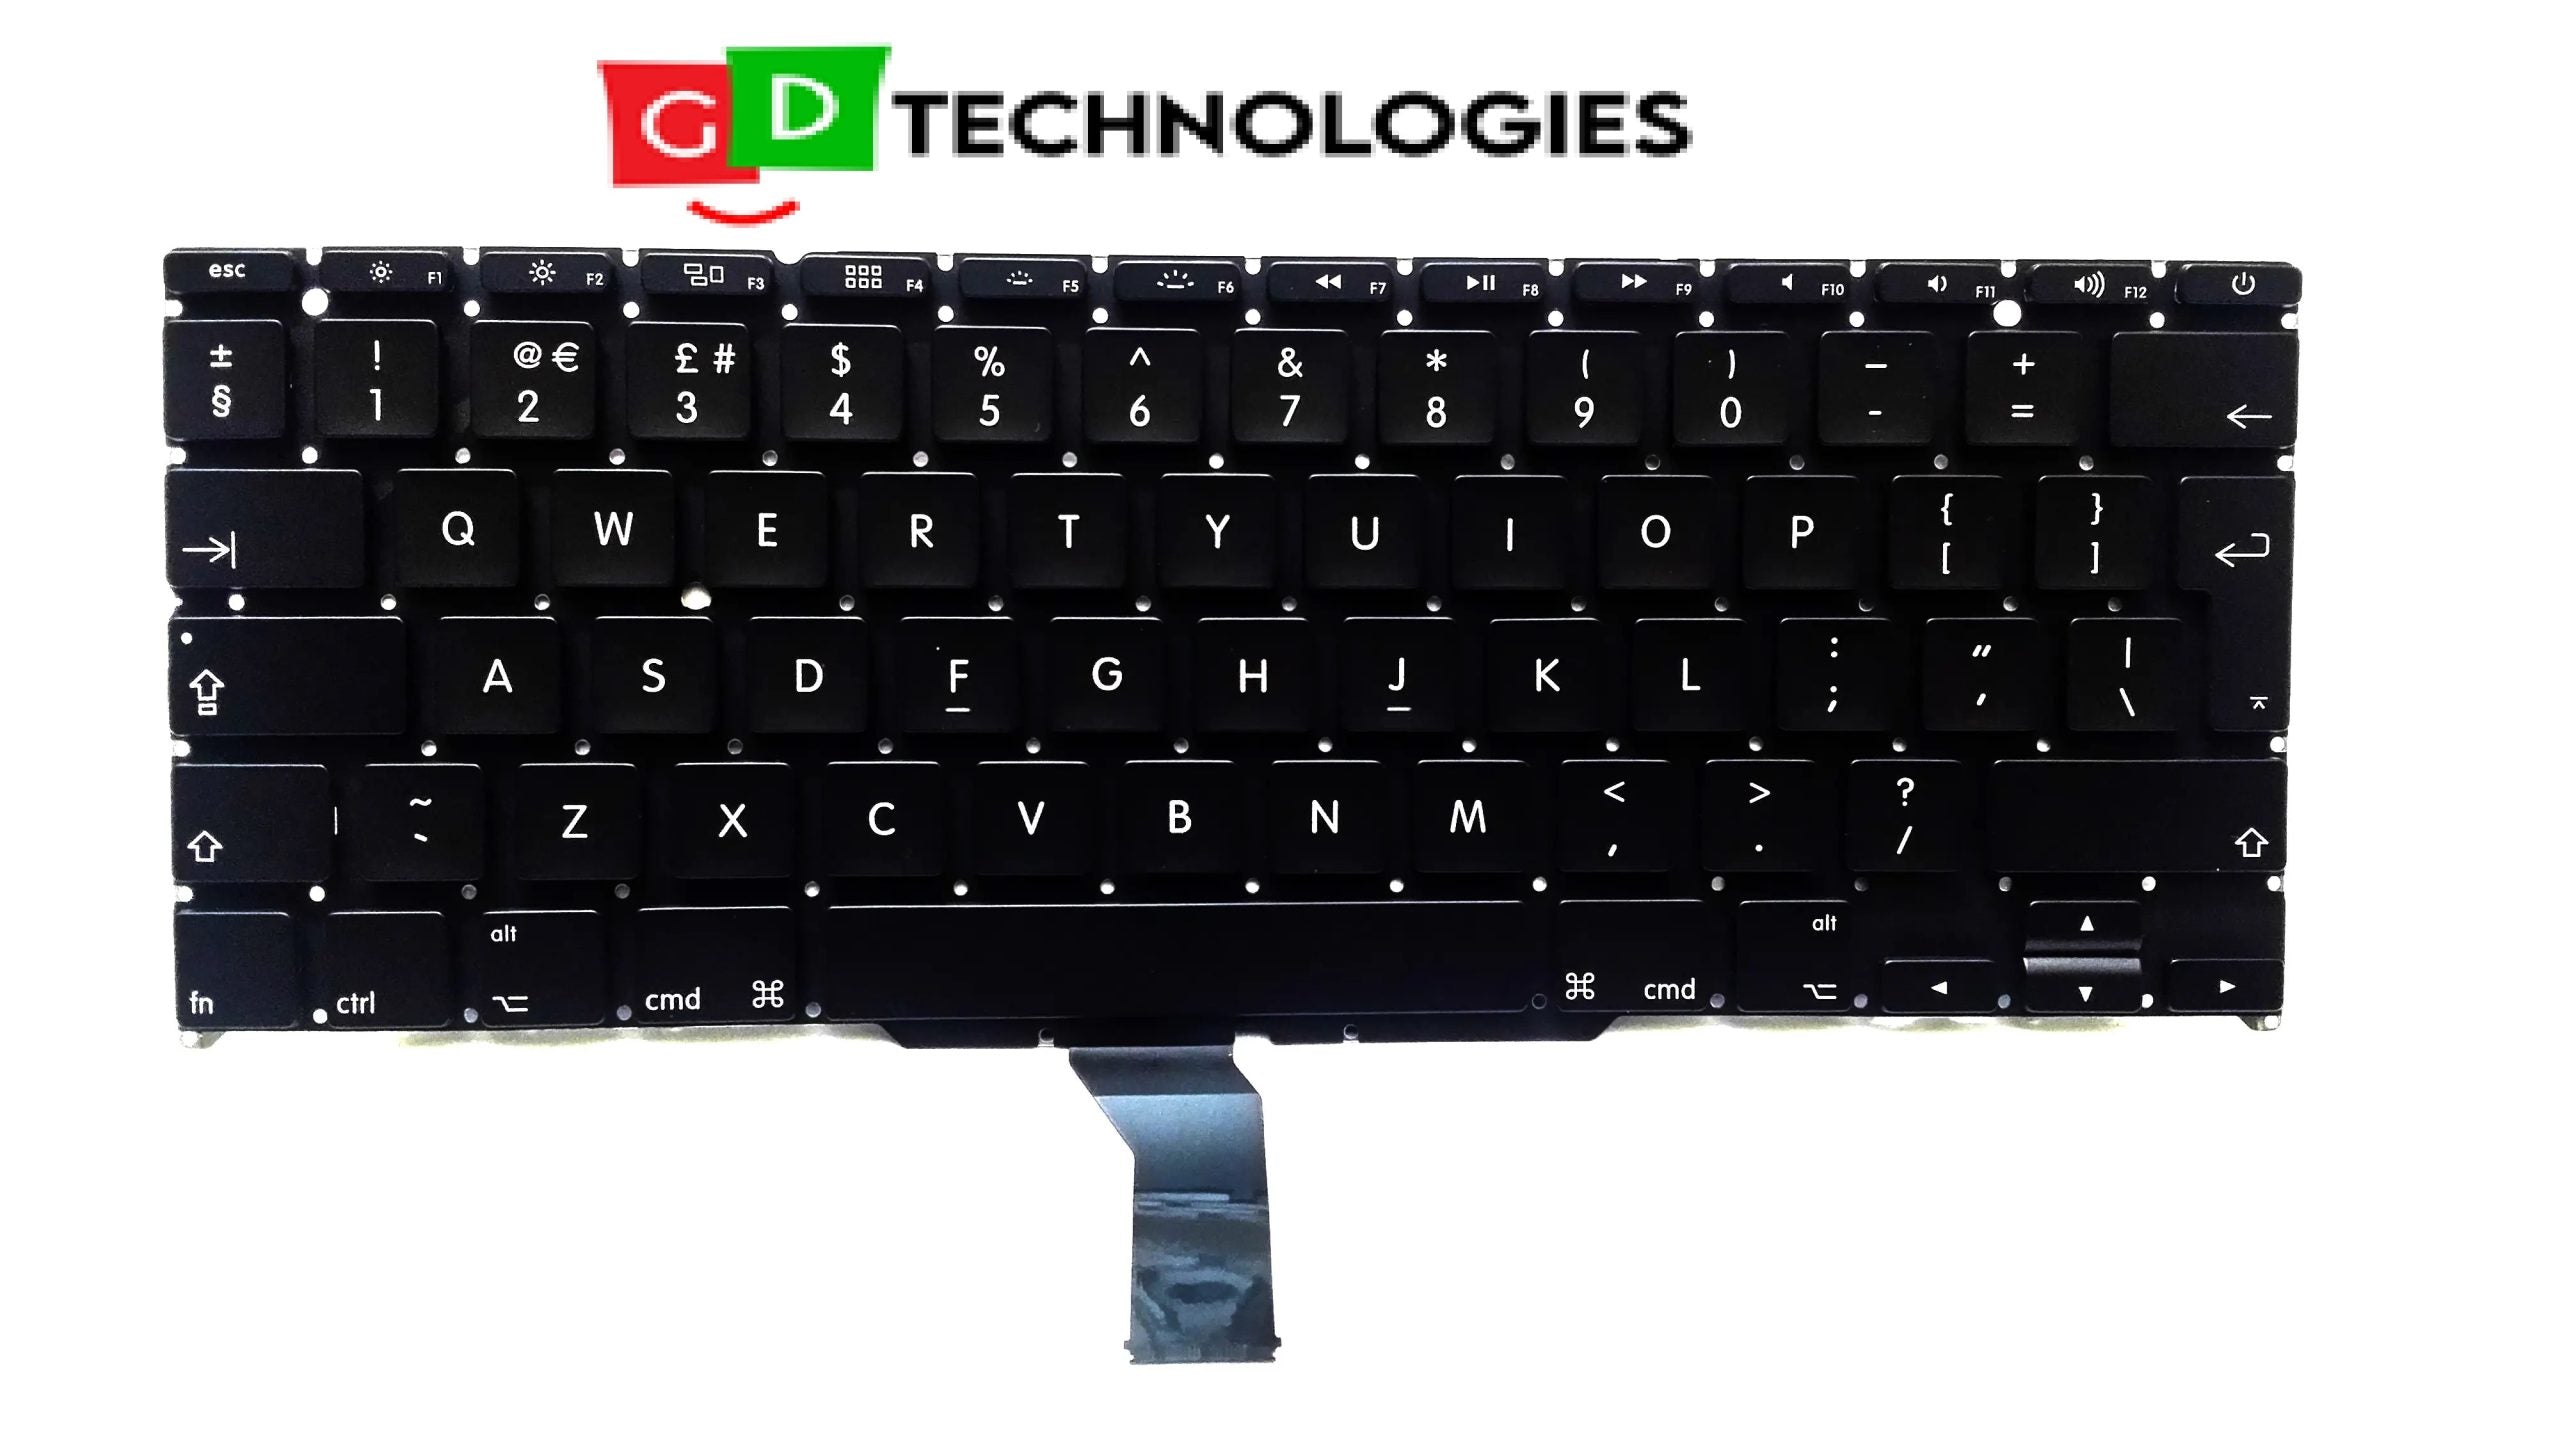 A1370 A1465 Keyboard (UK Layout) for Apple MacBook Air 11 inch A1370 (Late 2010,Mid 2011) A1465 (Mid 2012 – Early 2015)